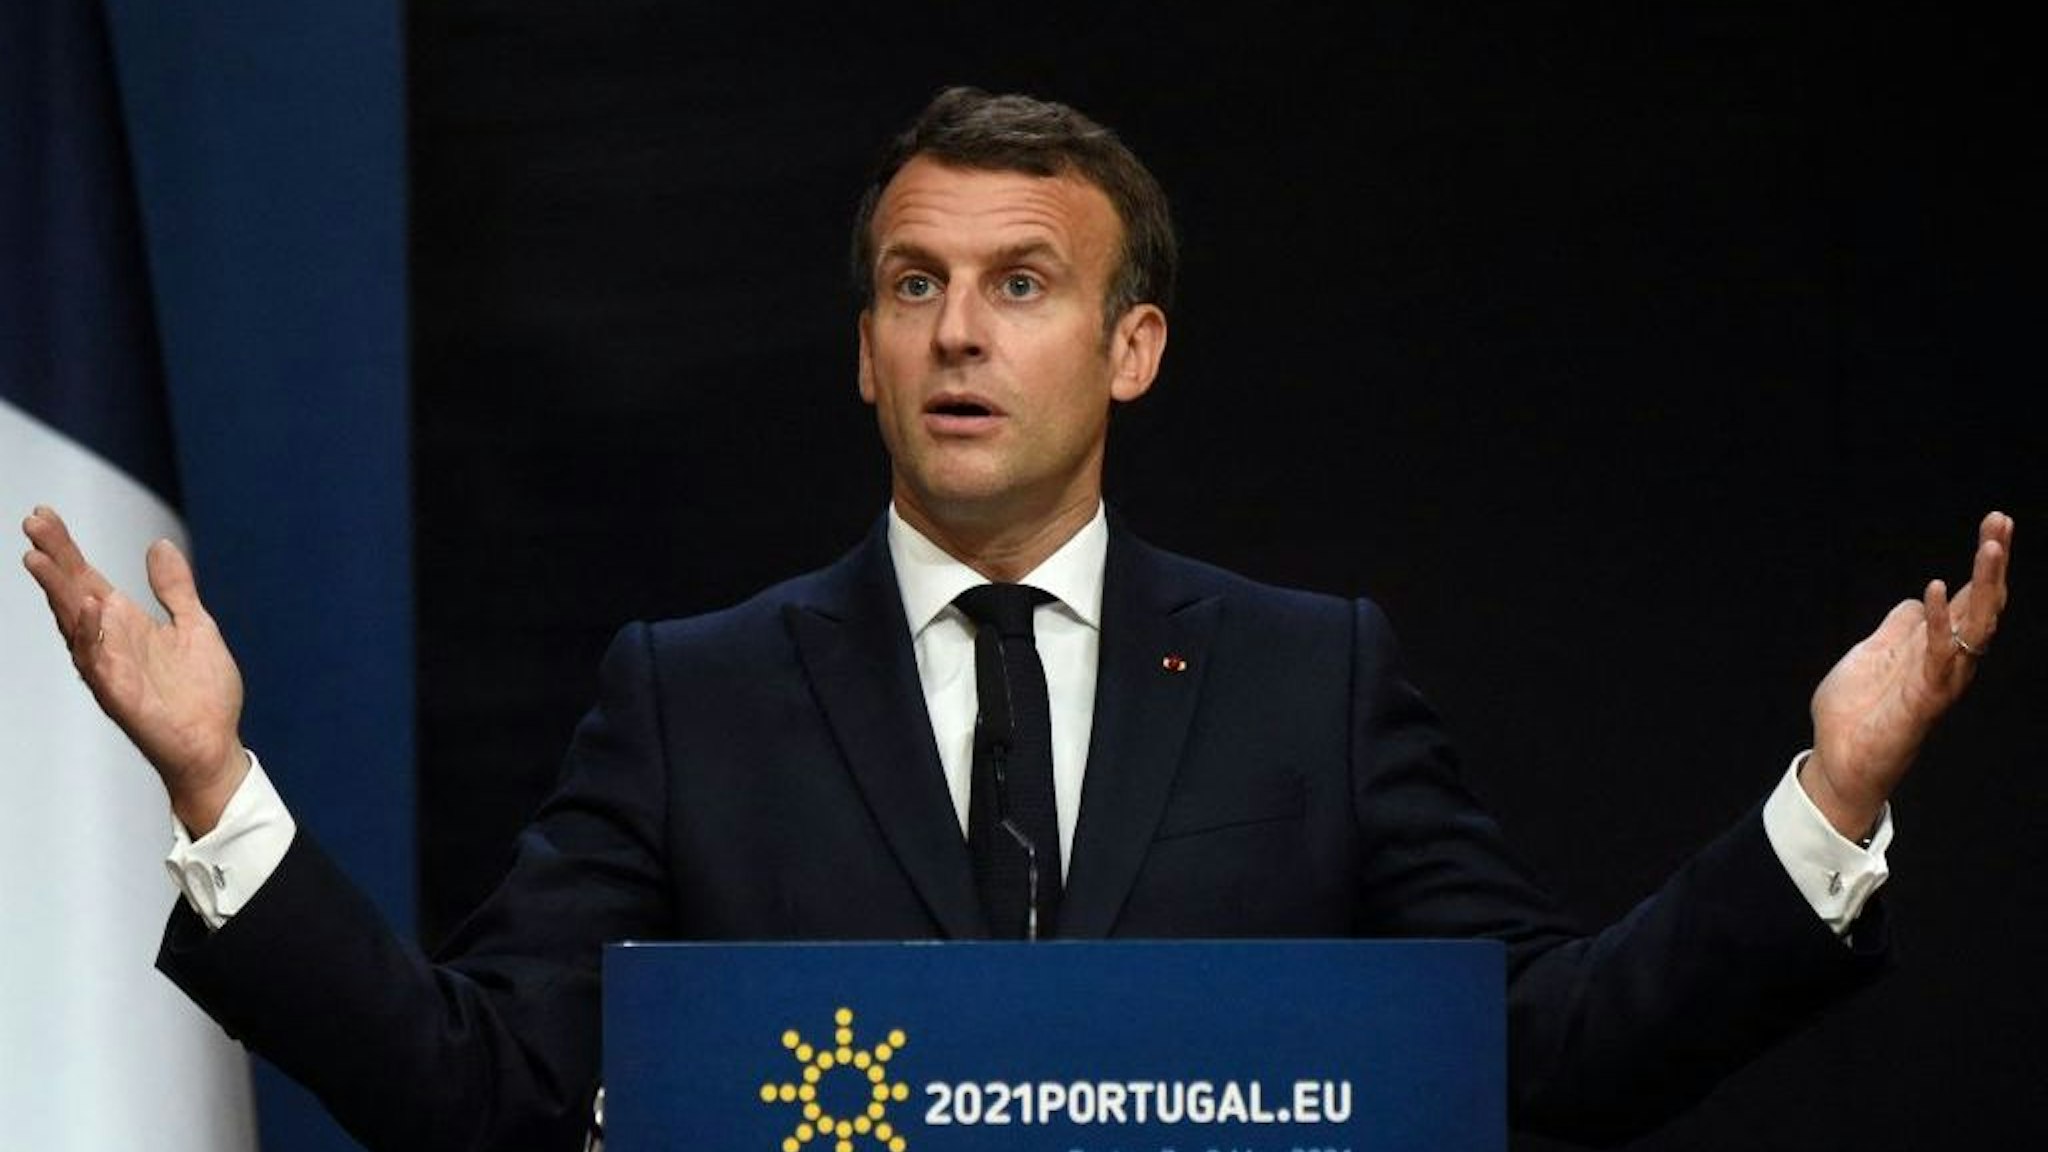 France's President Emmanuel Macron gives a press conference during the European Social Summit hosted by the Portuguese presidency of the Council of the European Union at the Palacio de Cristal in Porto on May 8, 2021. (Photo by MIGUEL RIOPA / POOL / AFP) (Photo by MIGUEL RIOPA/POOL/AFP via Getty Images)